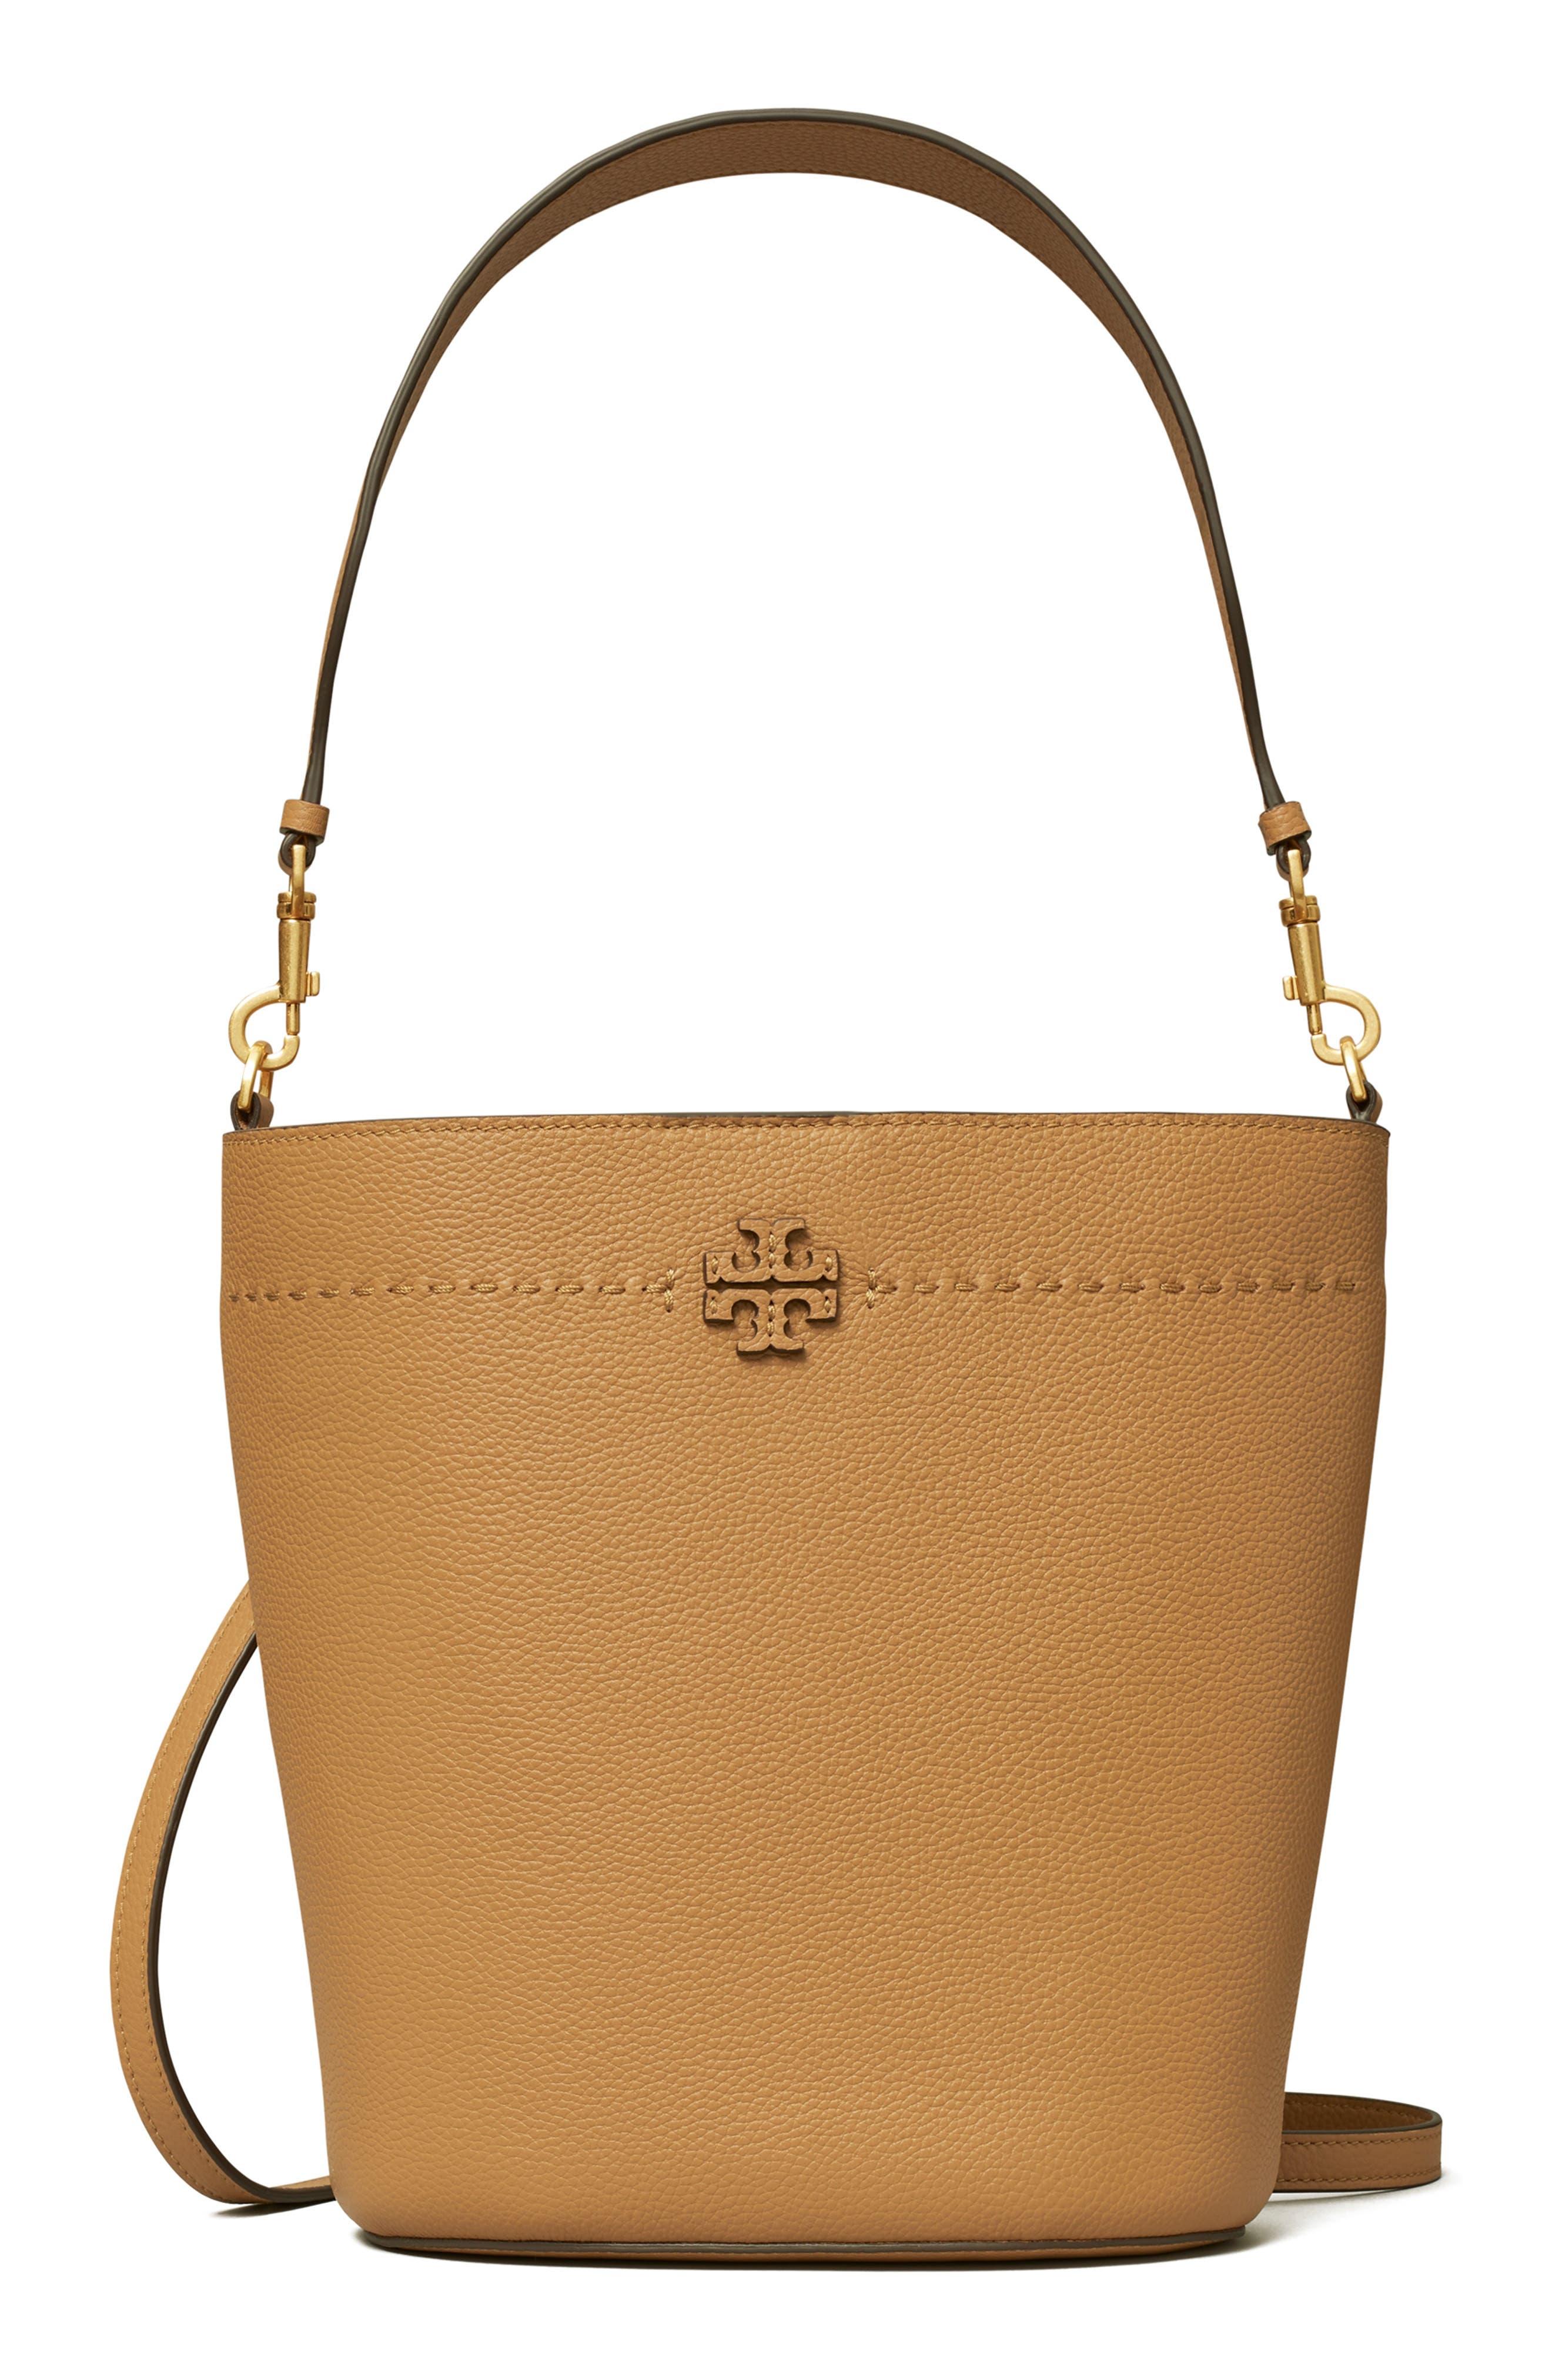 Tory Burch Mcgraw Leather Bucket Bag in Brown | Lyst